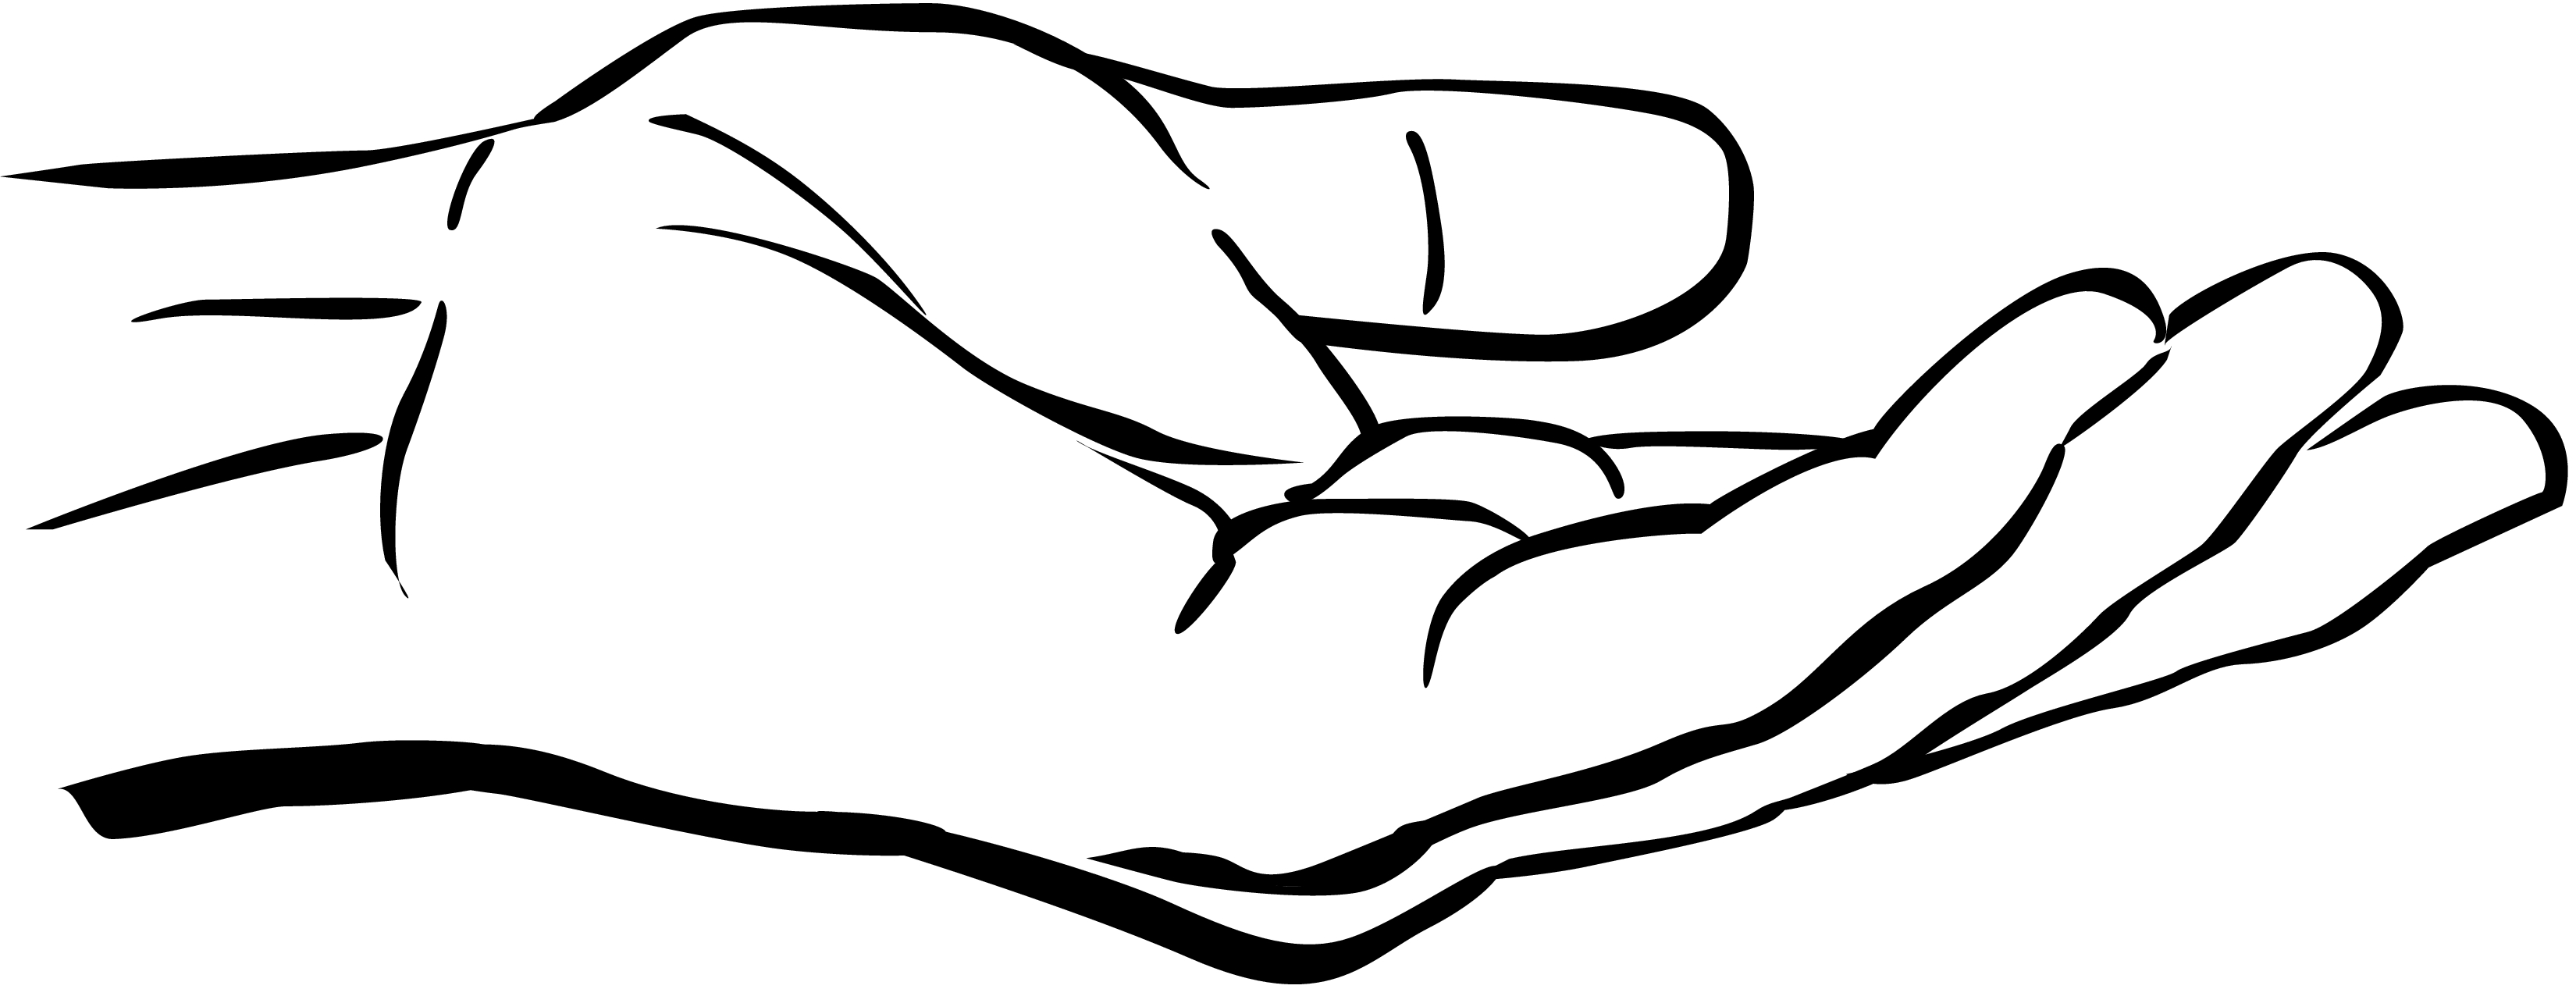 Helping hands clipart black and white